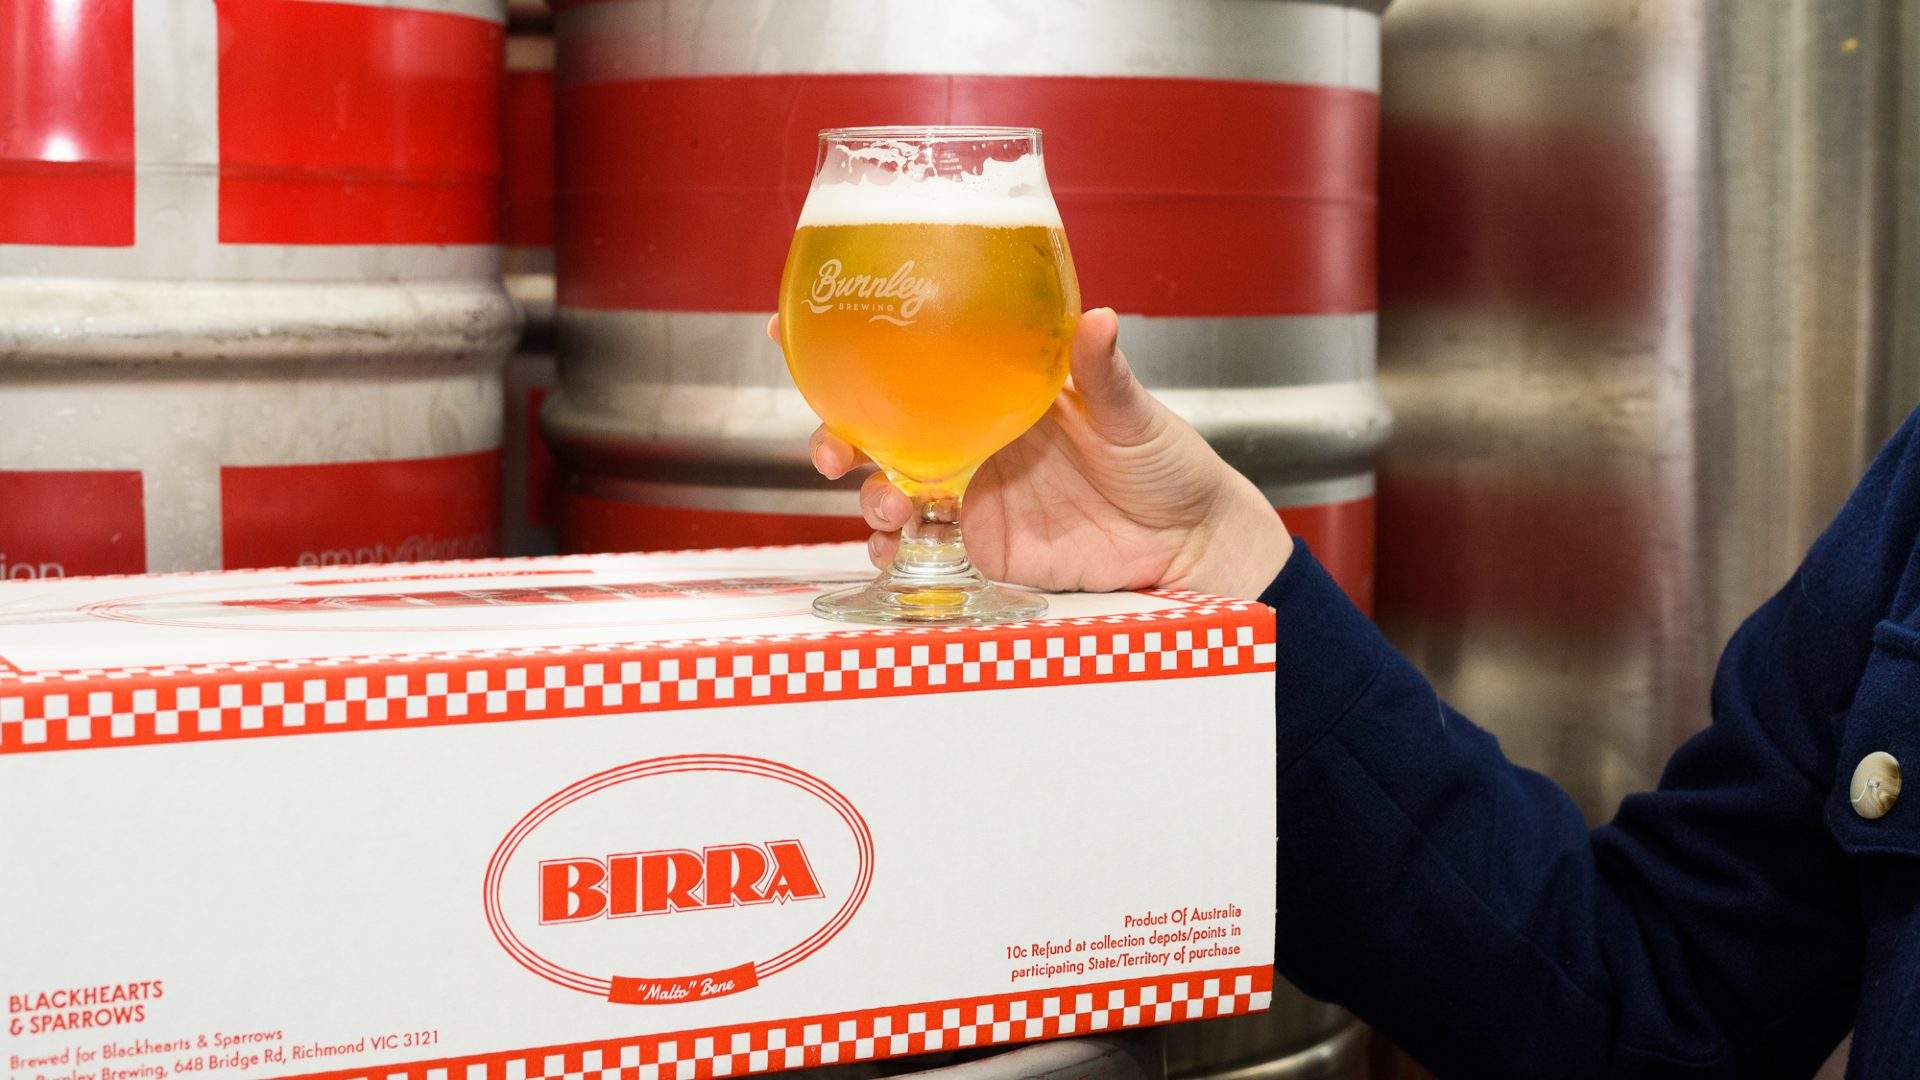 Birra Is the New Italian Lager by Blackhearts & Sparrows and Its First-Ever House Release Beer